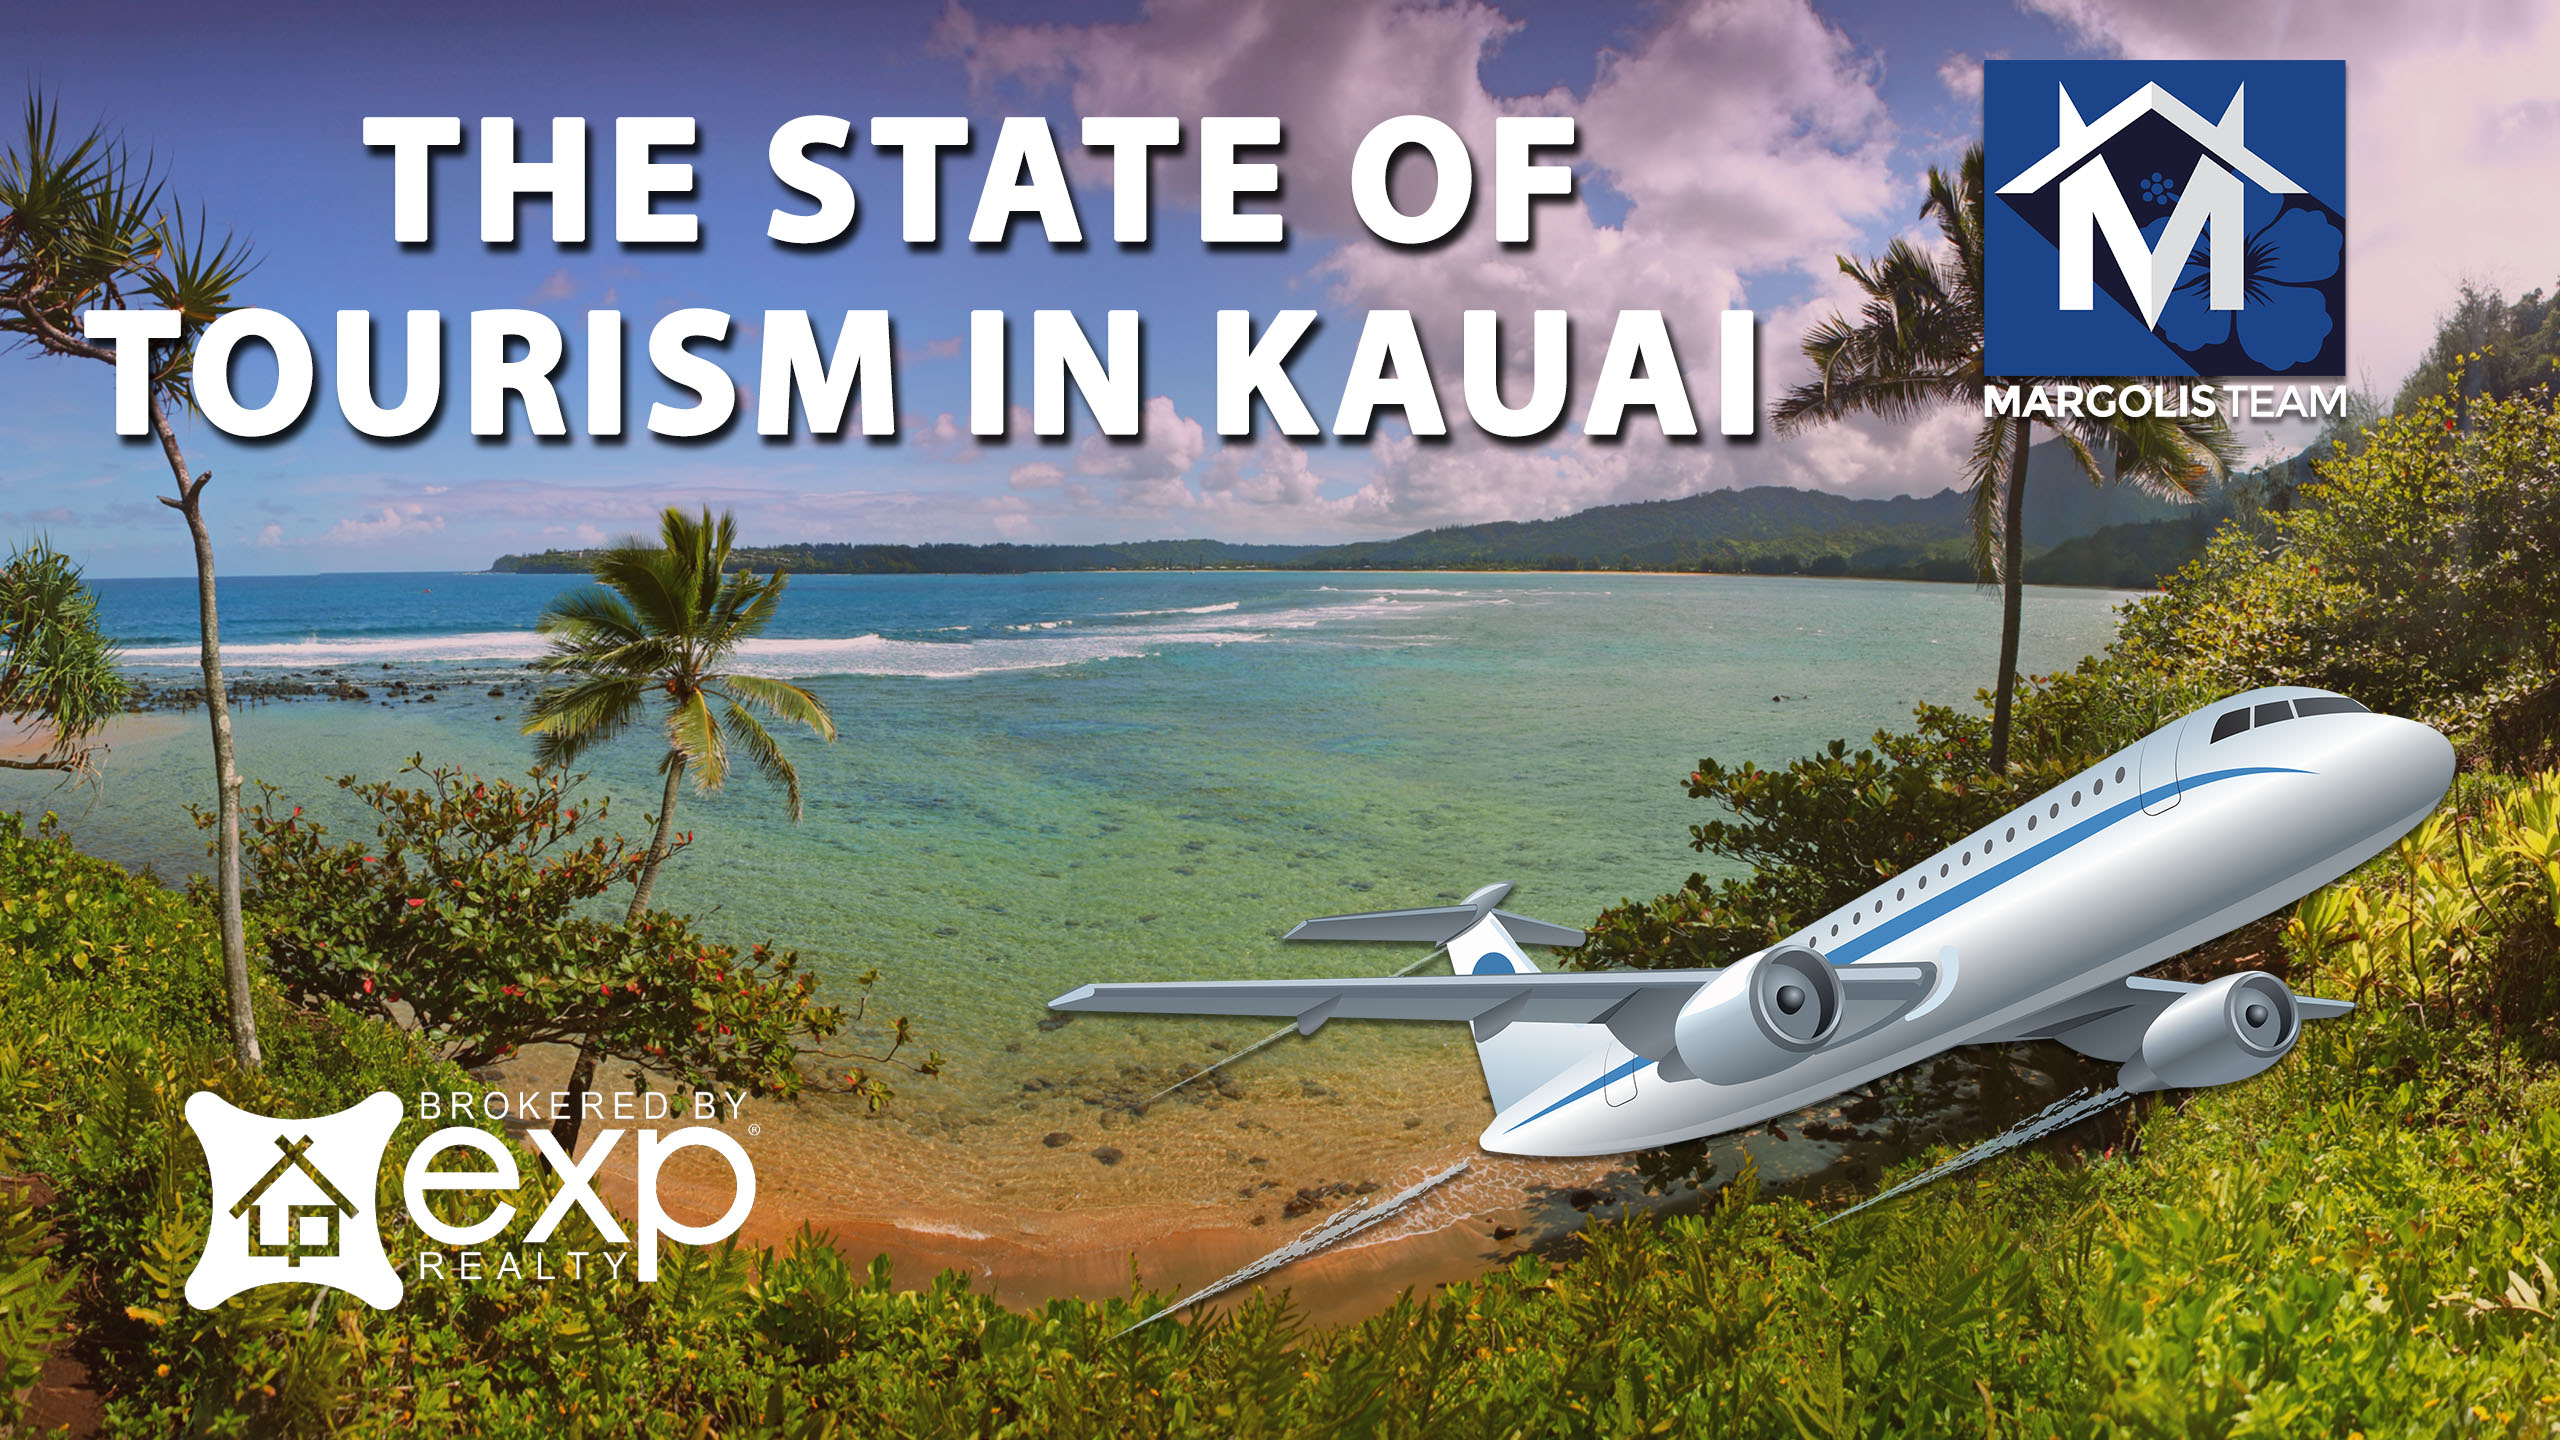 What Key Issues Affect Tourism in Kauai?